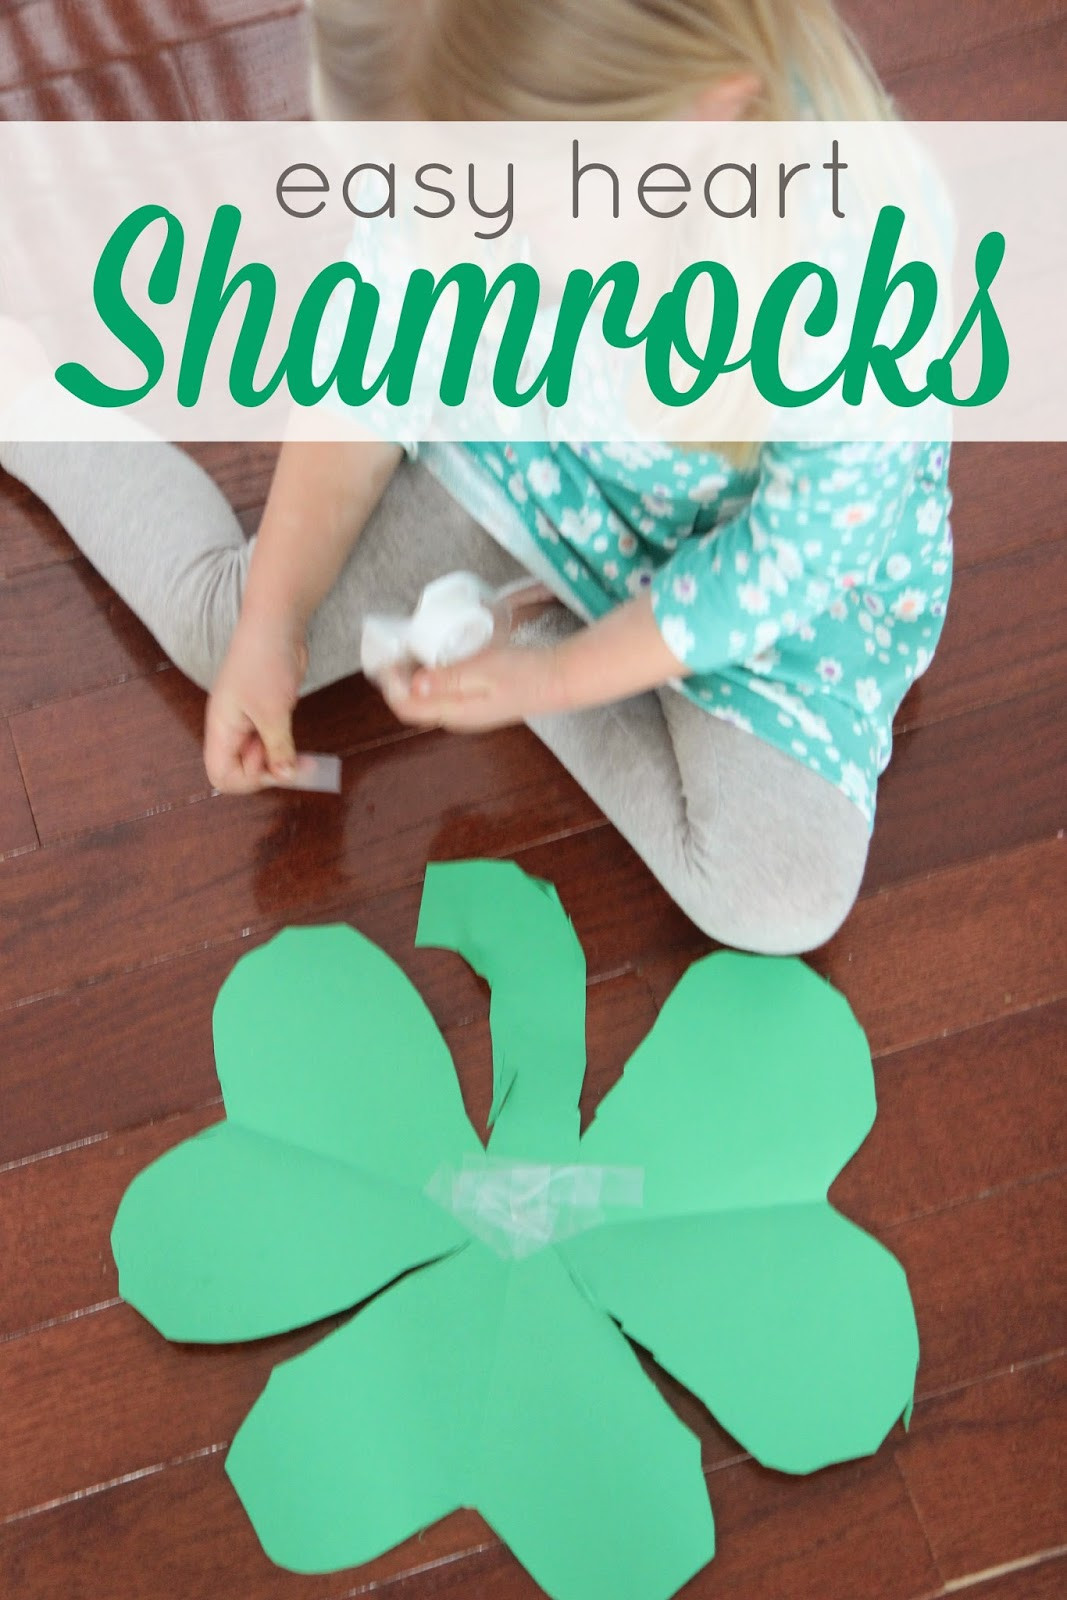 Simple Crafts For Preschoolers
 Toddler Approved 8 Easy St Patrick s Day Crafts for Kids